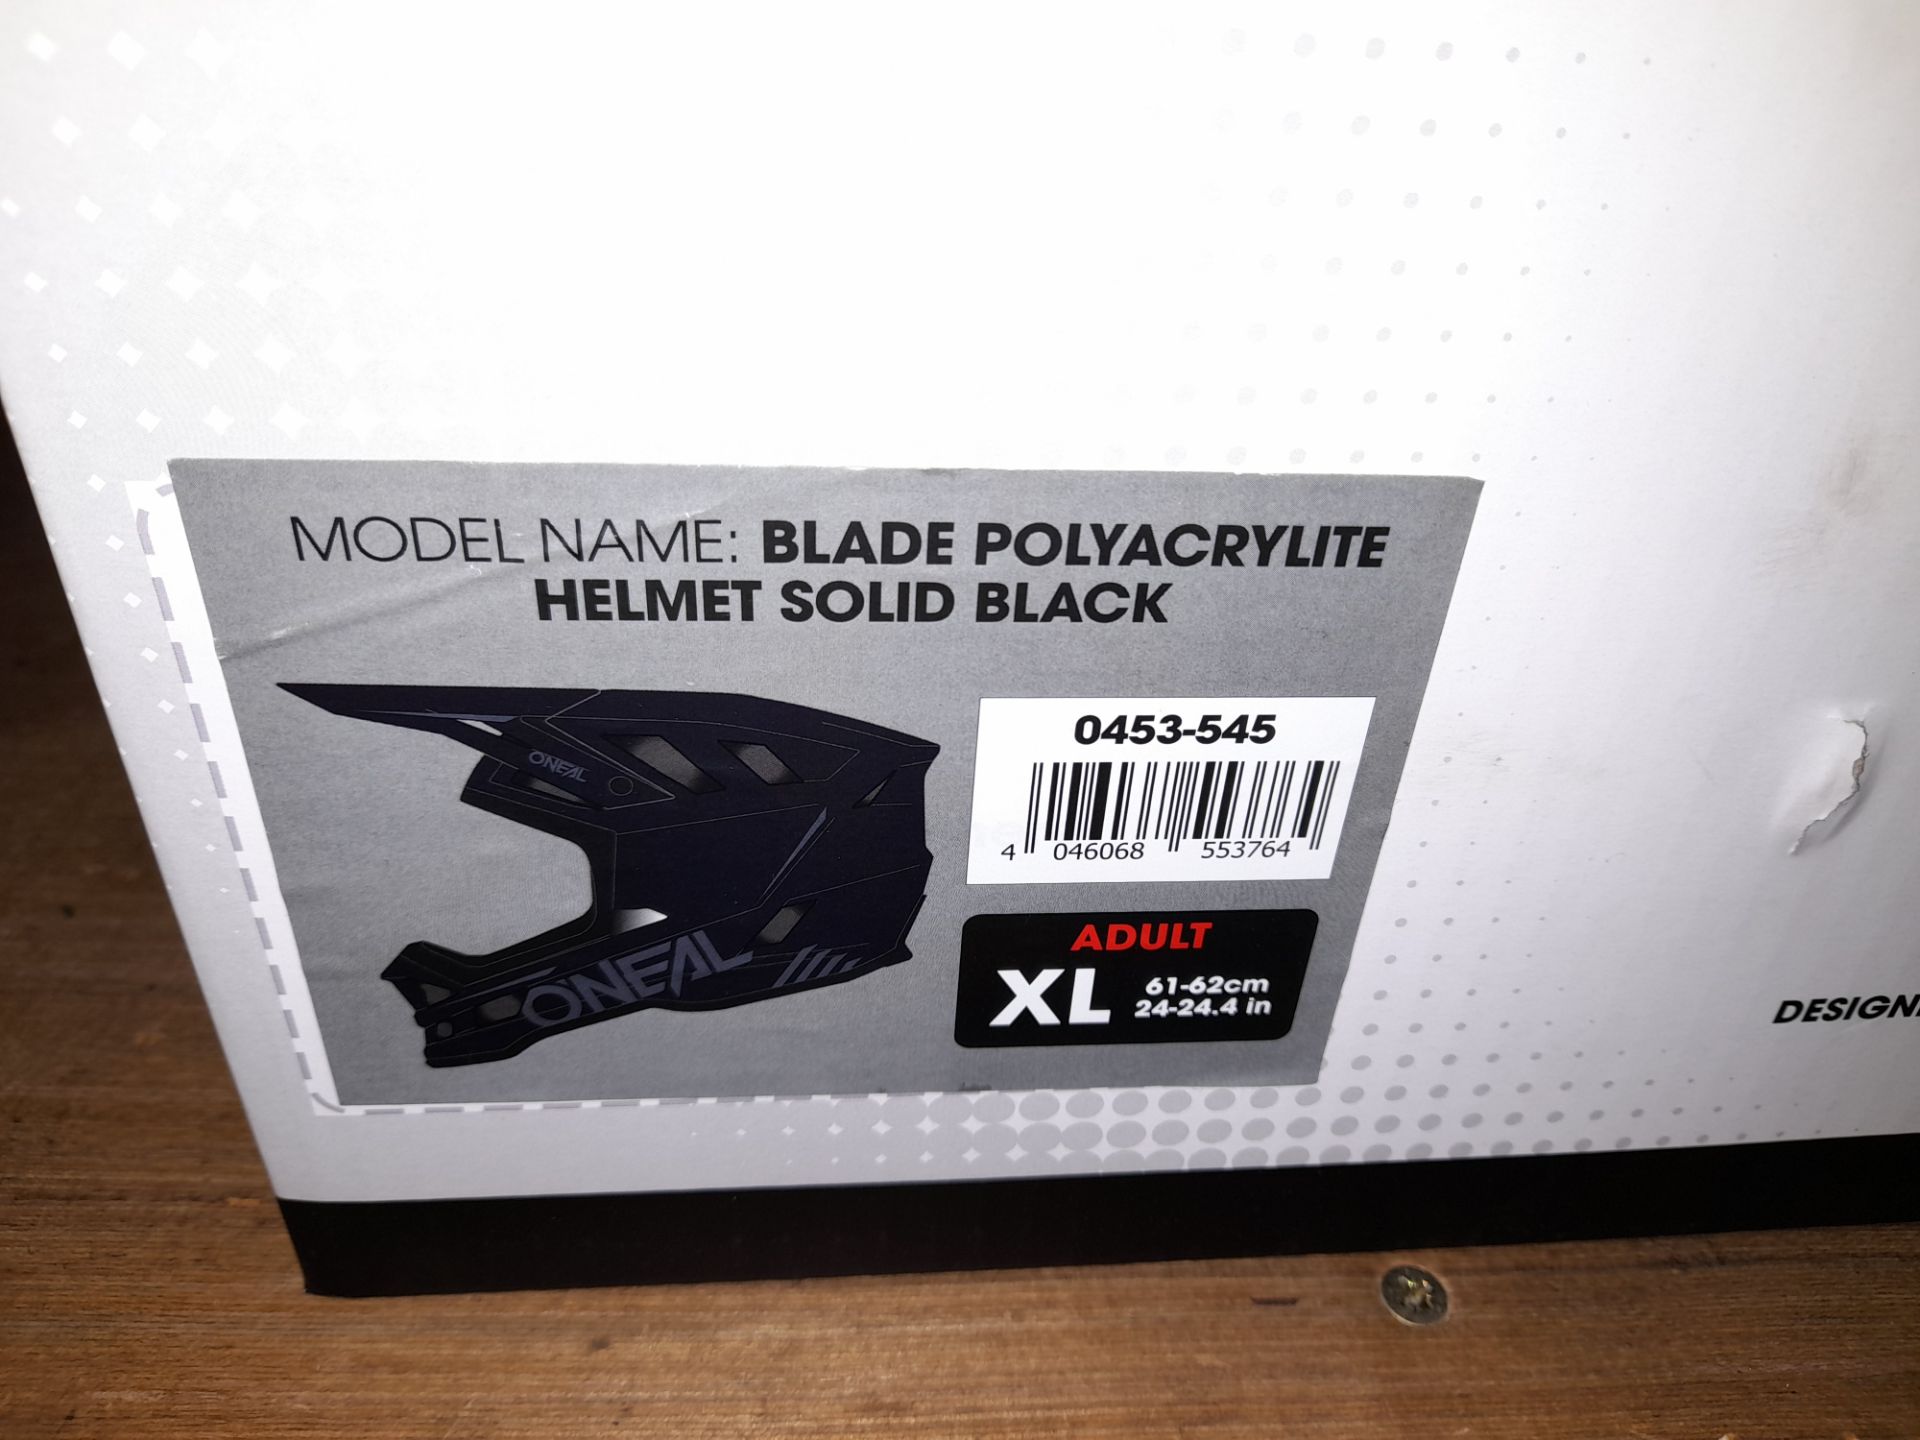 O'Neal Blade Polyacrylite X-Large (61-62cm) Helmet Solid Black (This lot forms part of composite lot - Image 3 of 4